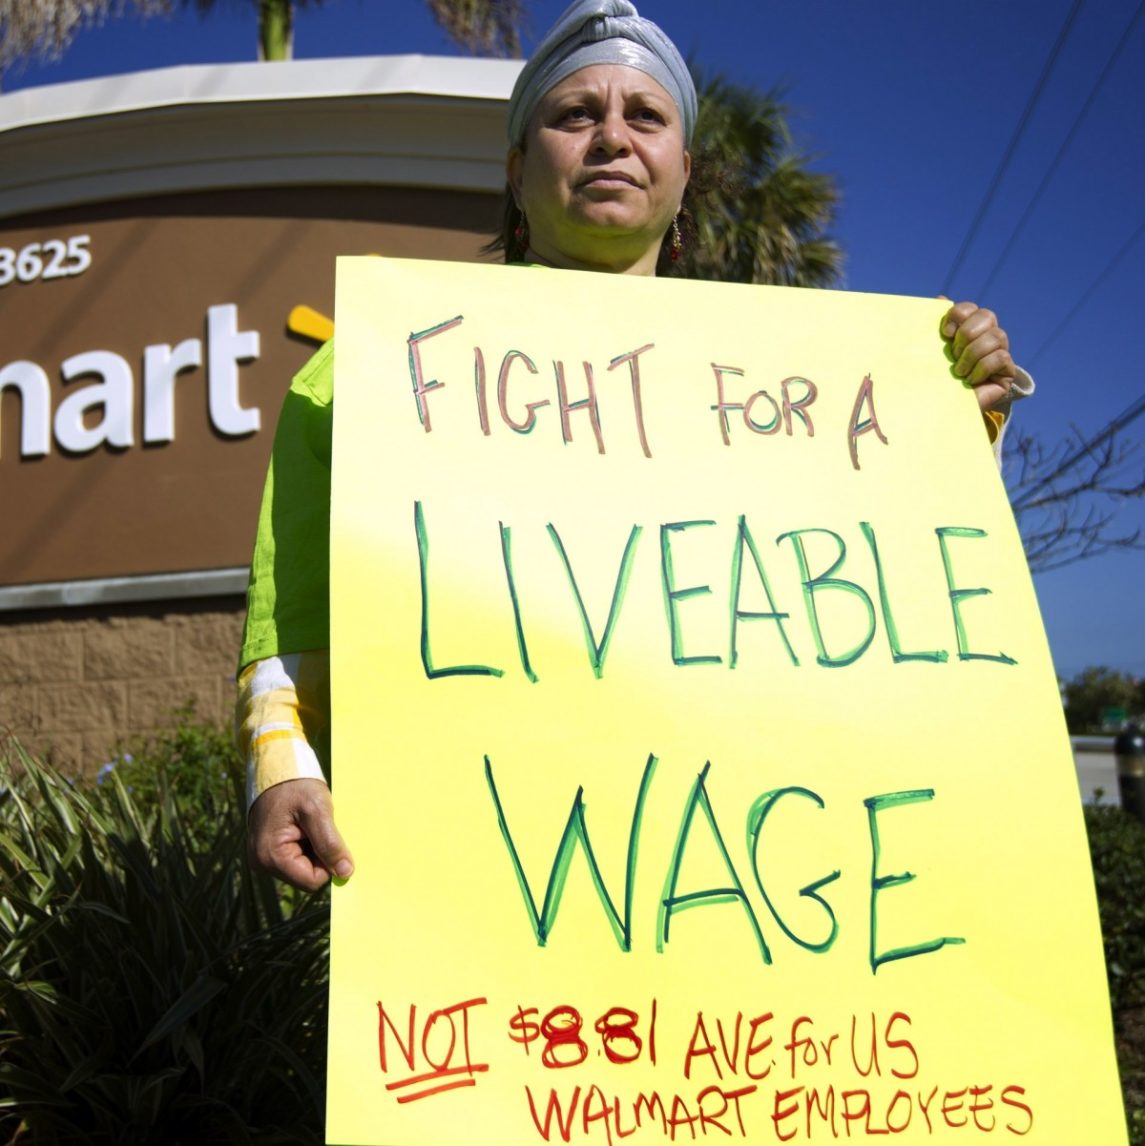 UPDATE: Wal-Mart Workers Launch Surprise Strike Over Safety Issues